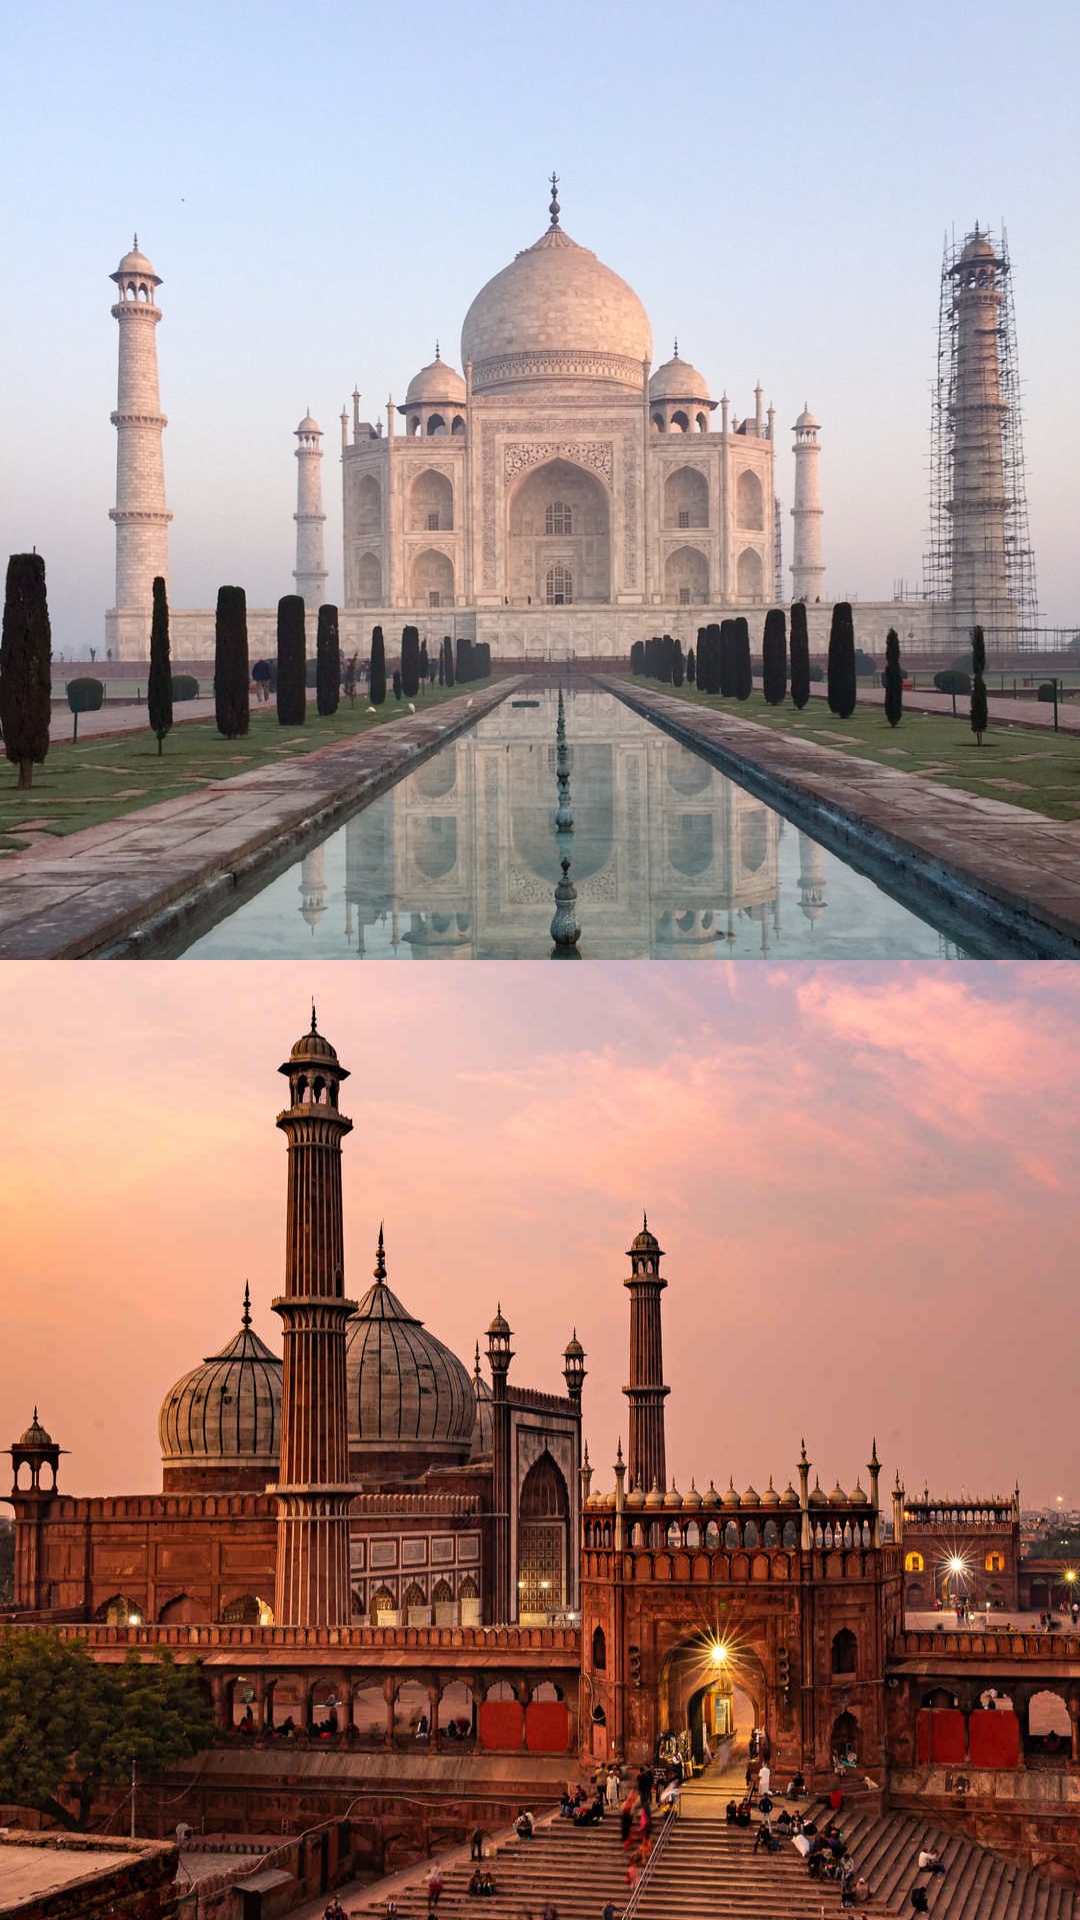 5 expensive monuments built by Mughals